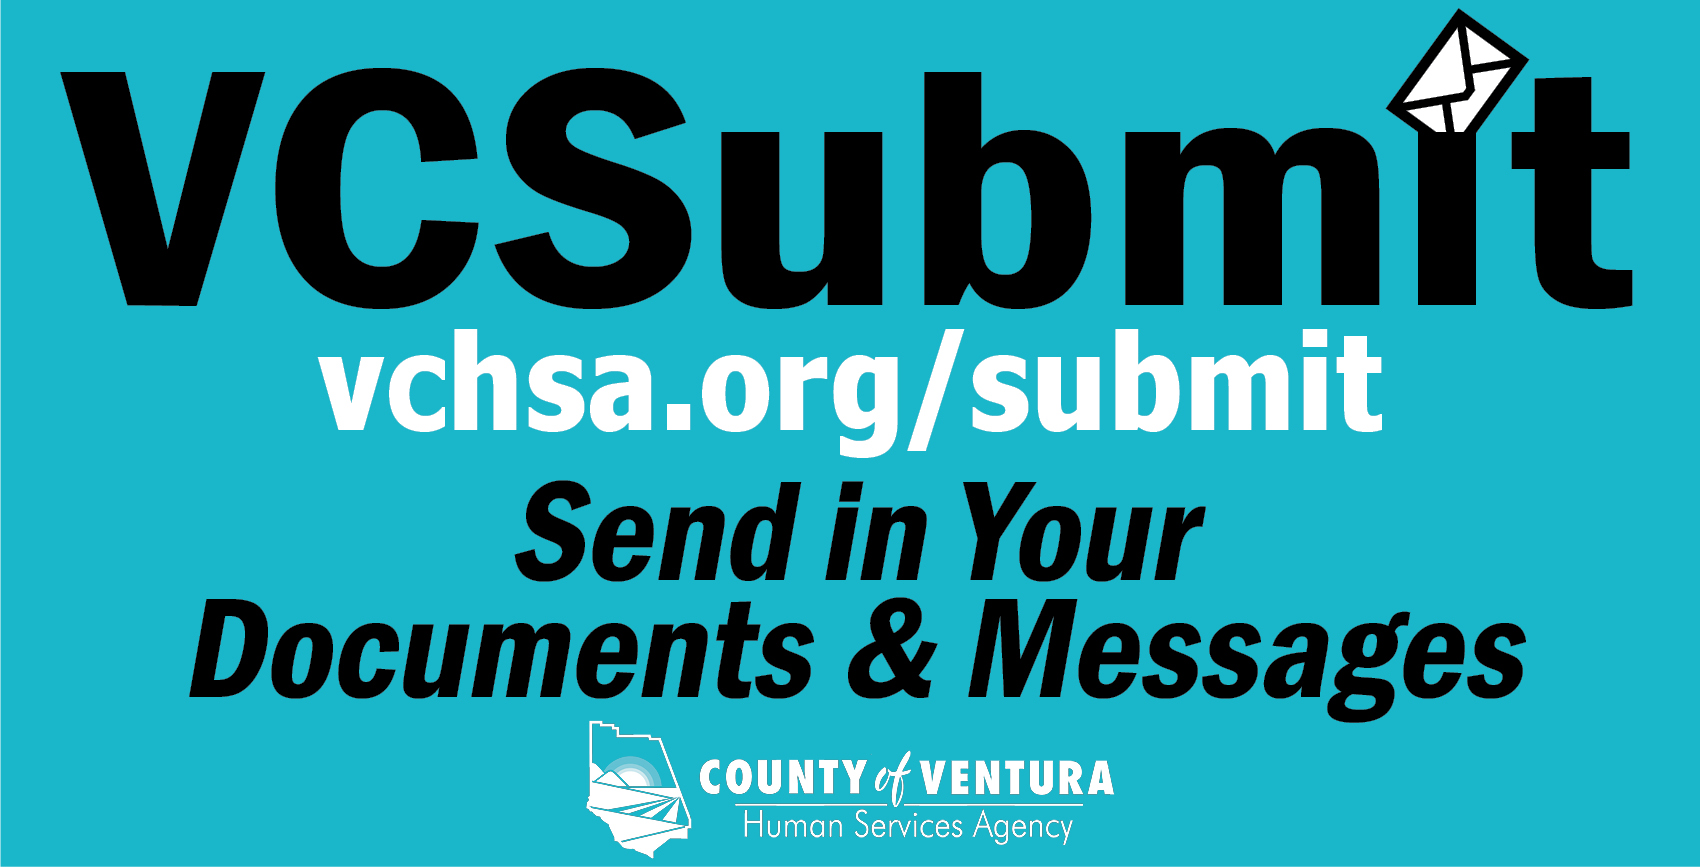 VCsubmit vchsa.org/submit Send in Your Documents and Messages